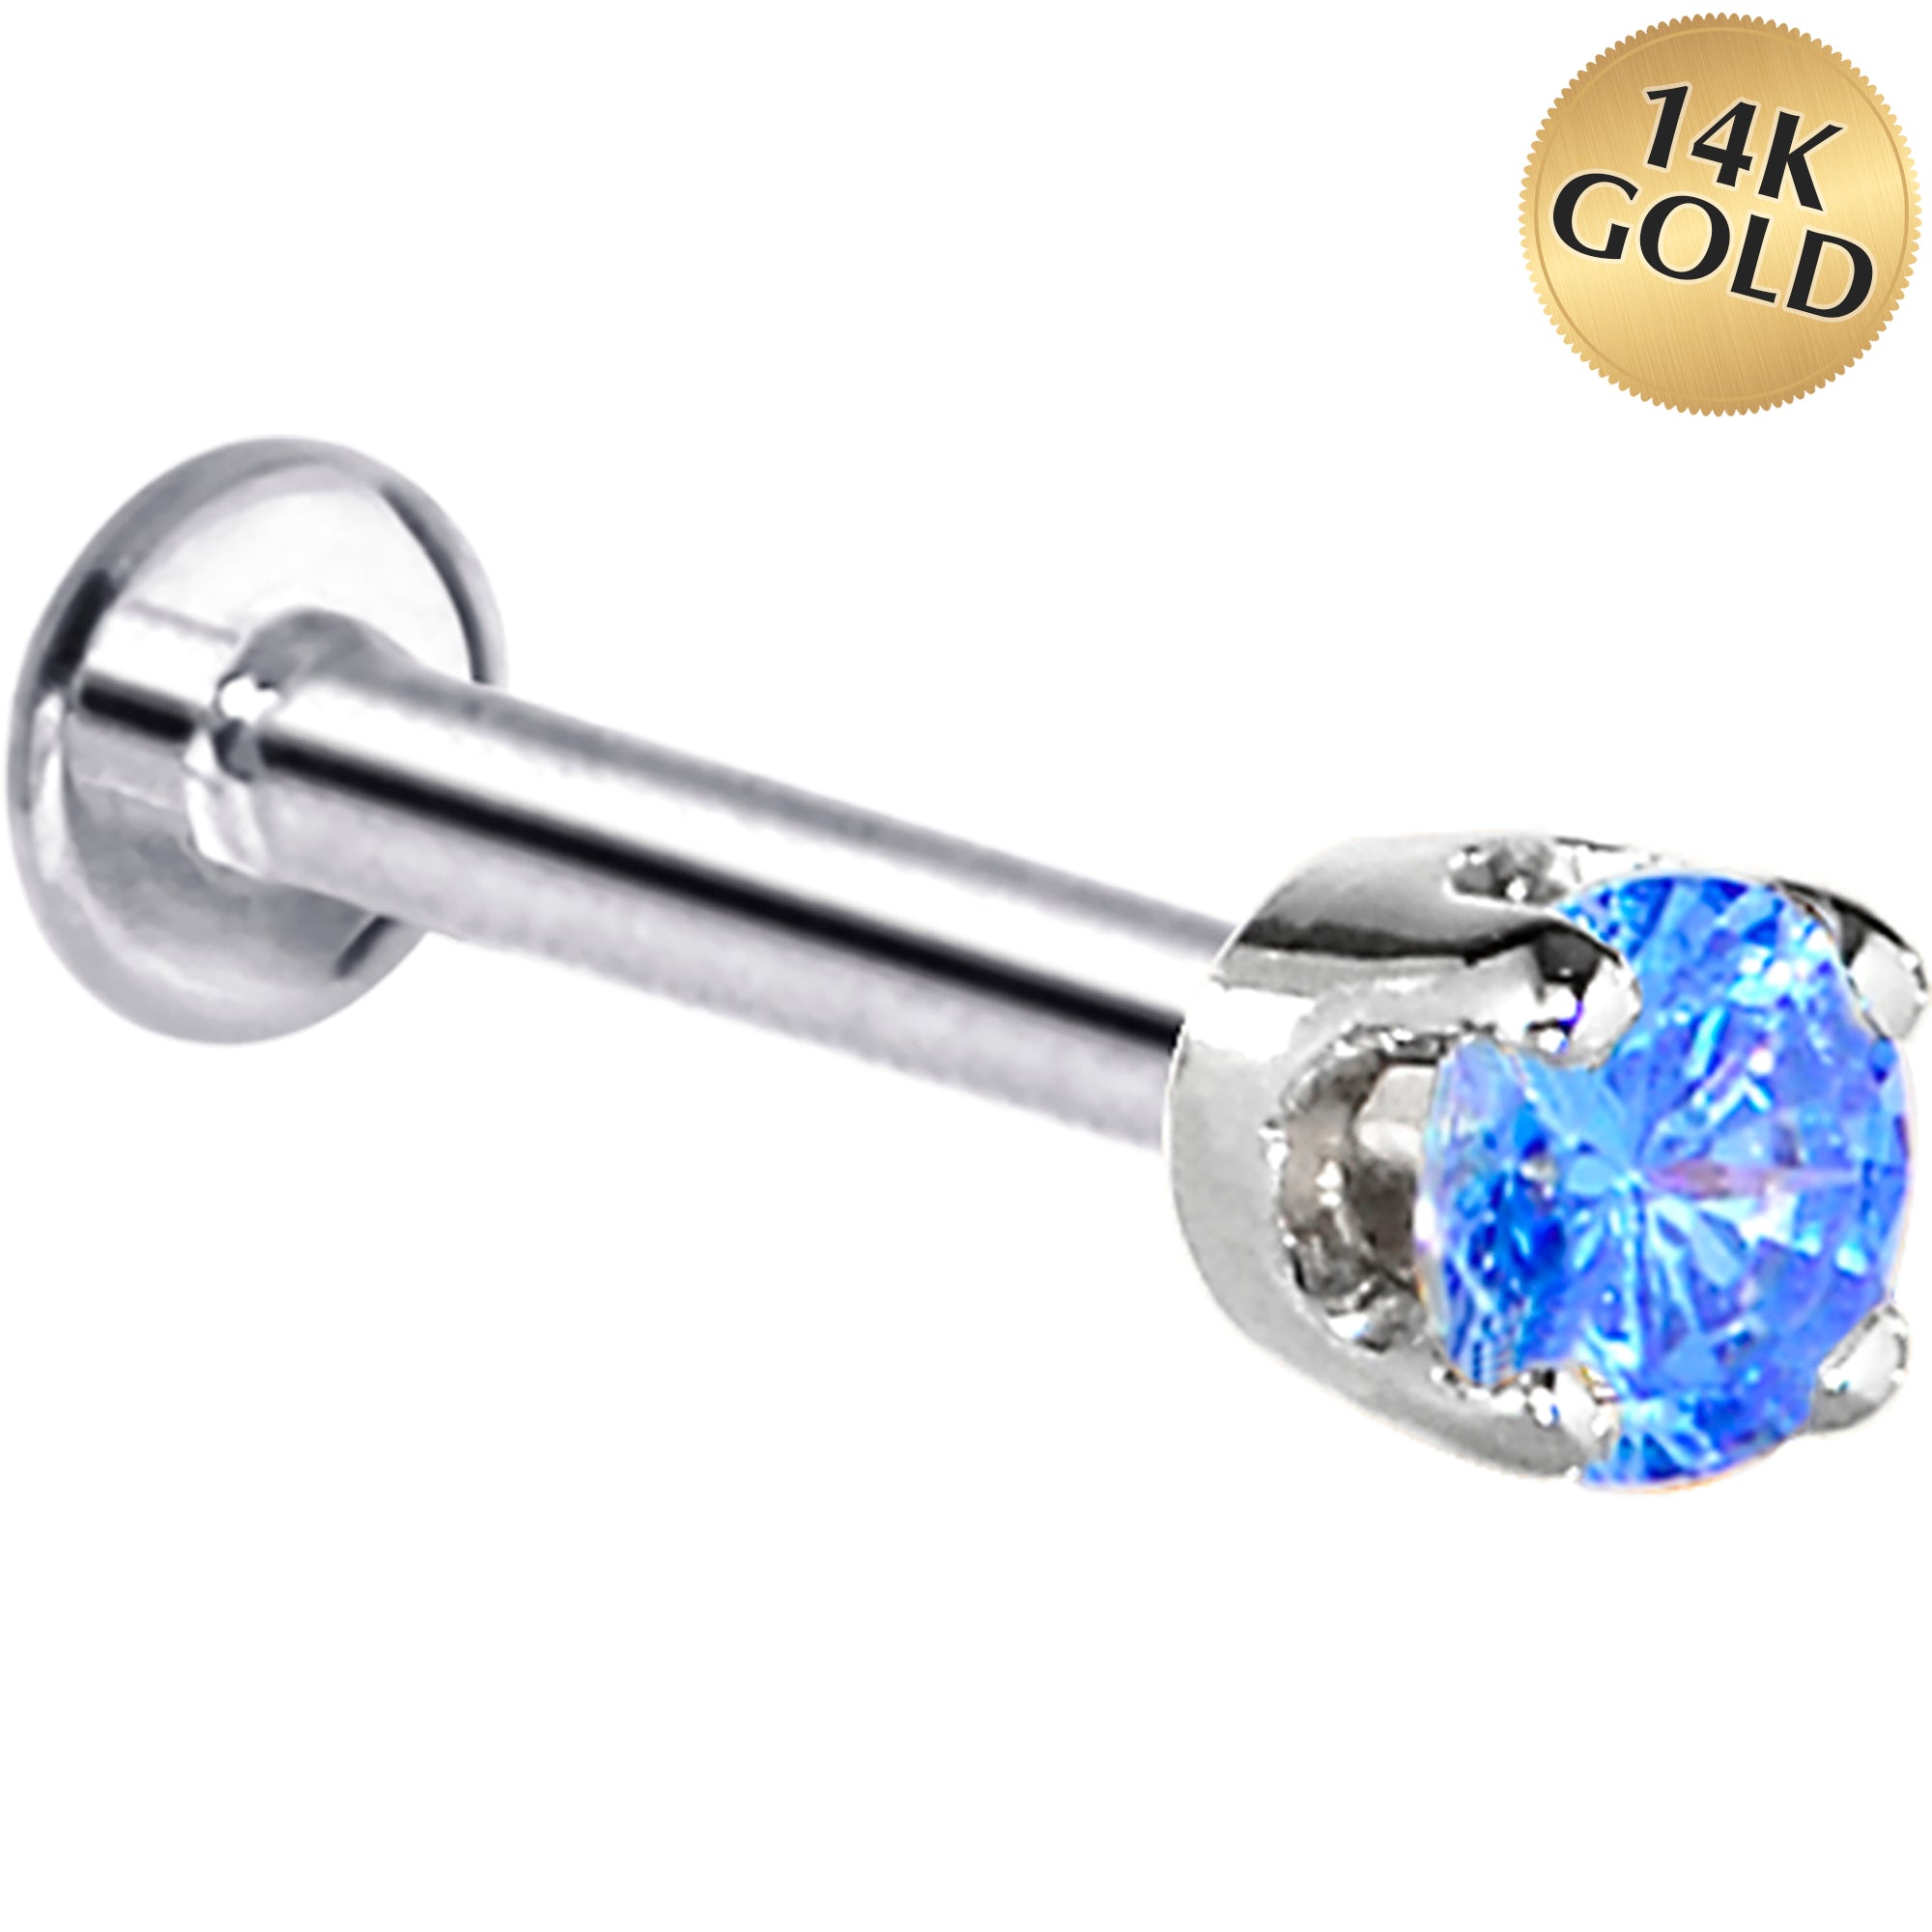 16 Gauge Solid 14KT White Gold 3mm Arctic Cubic Zirconia Tragus Earring Stud